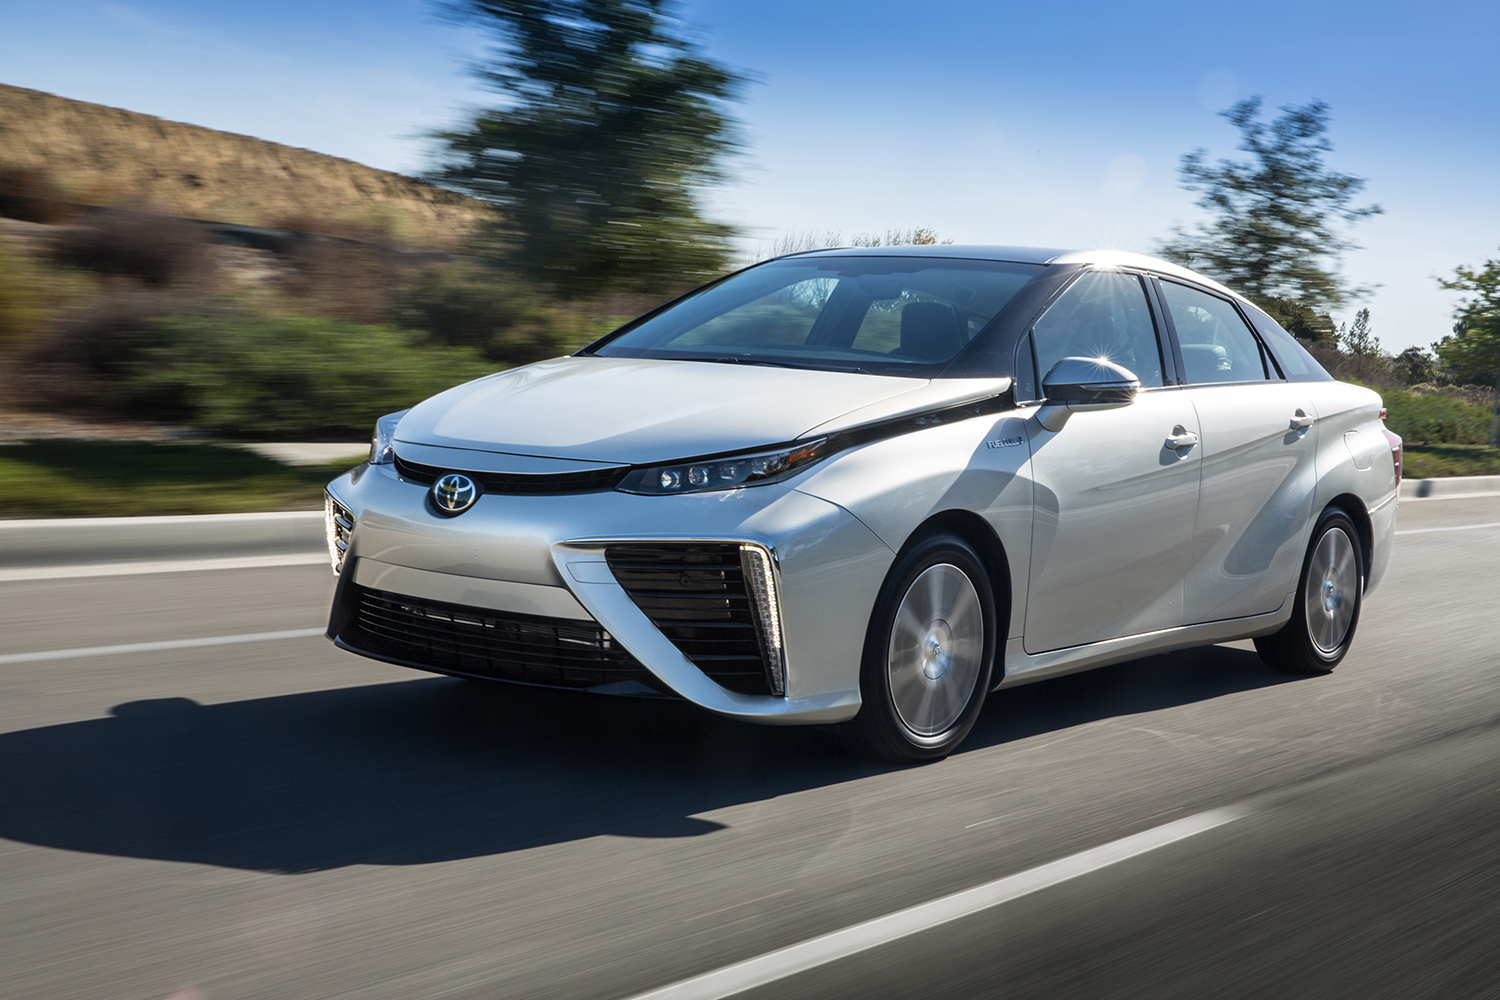 Redesigned Toyota Mirai Fuel Cell Car Launching In 2020, Exec Says |  Digital Trends